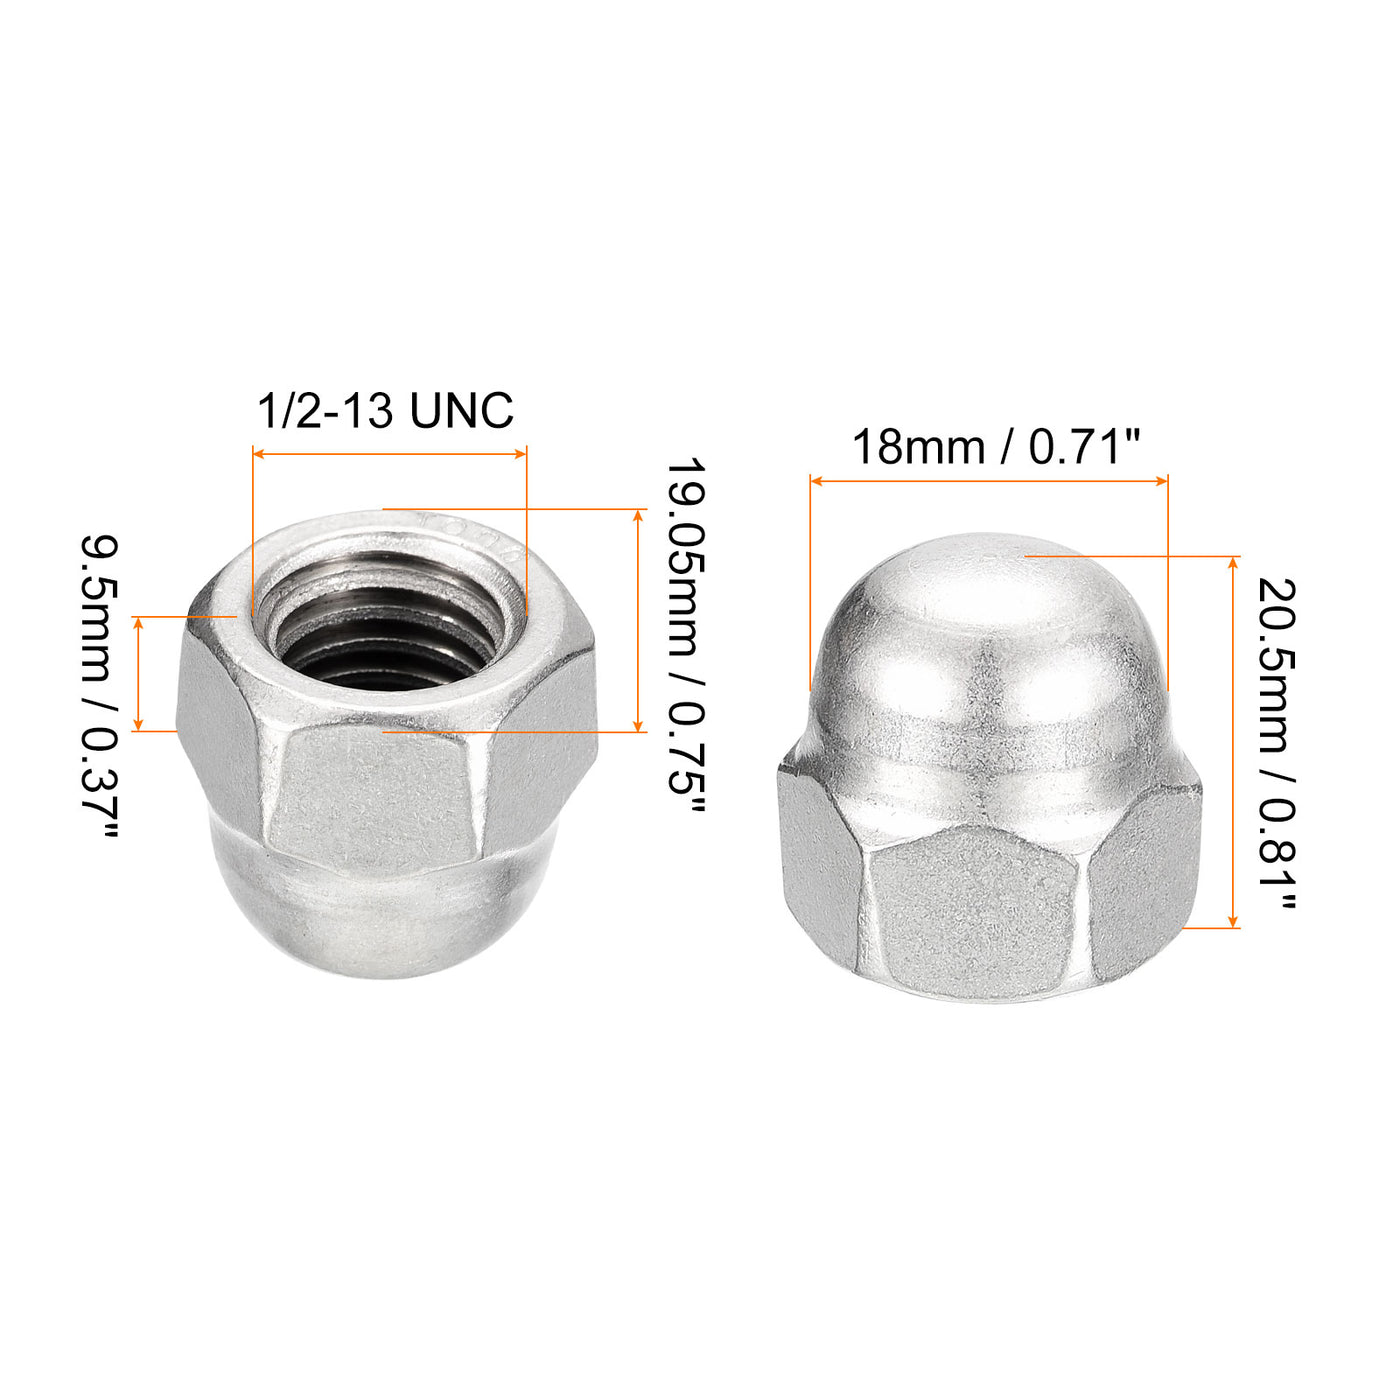 uxcell Uxcell 1/2-13 Acorn Cap Nuts,10pcs - 304 Stainless Steel Hardware Nuts, Acorn Hex Cap Dome Head Nuts for Fasteners (Silver)